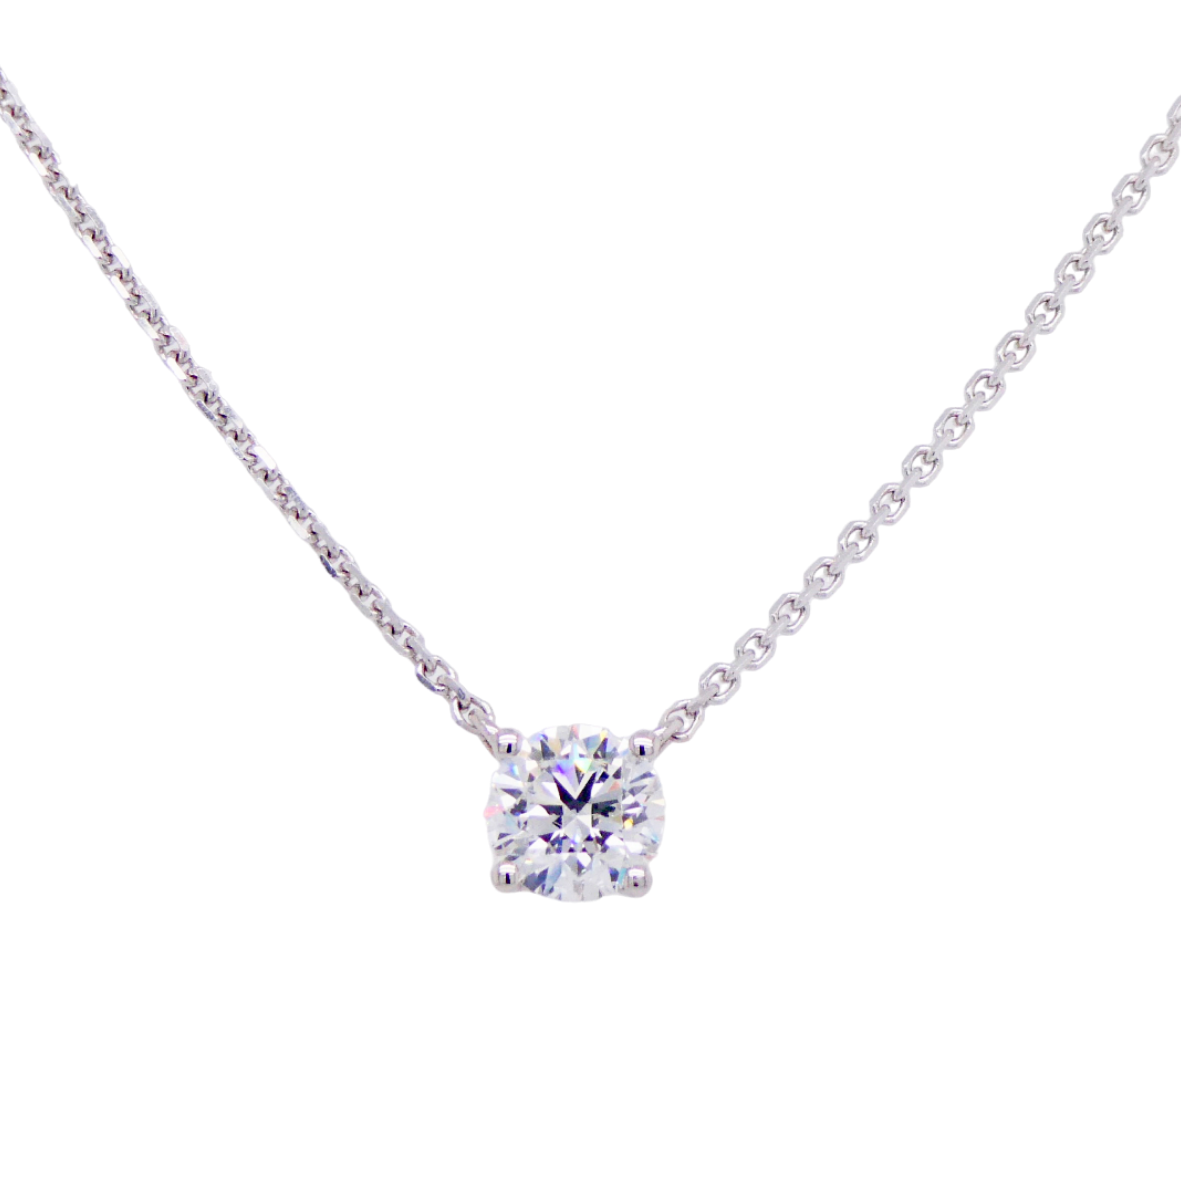 18ct White Gold Necklace with Amethyst & Diamond Pendant - Correani Design  - Artifacts World